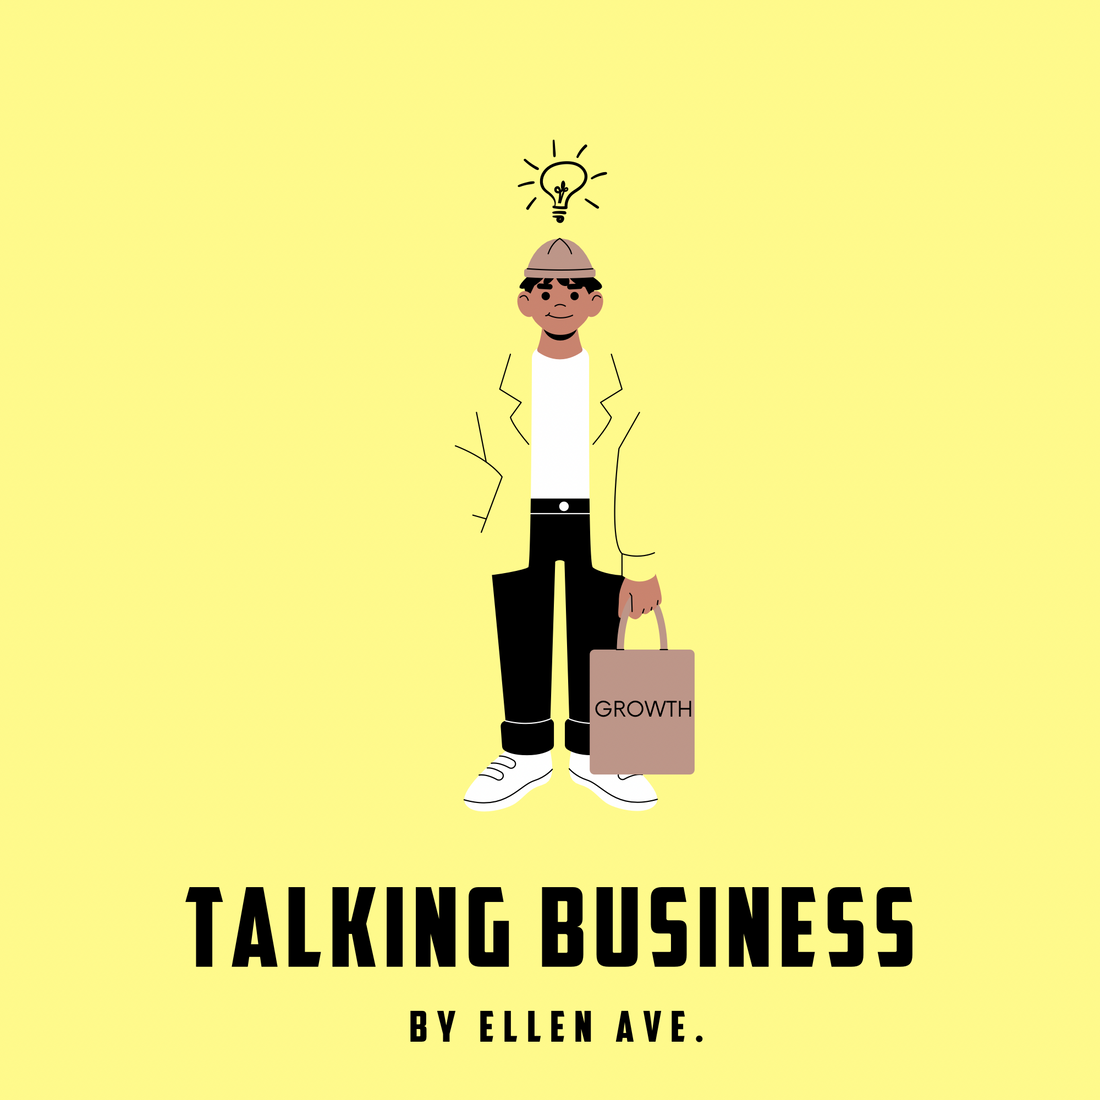 Talking Business Podcast by Ellen Ave: INTRODUCTION